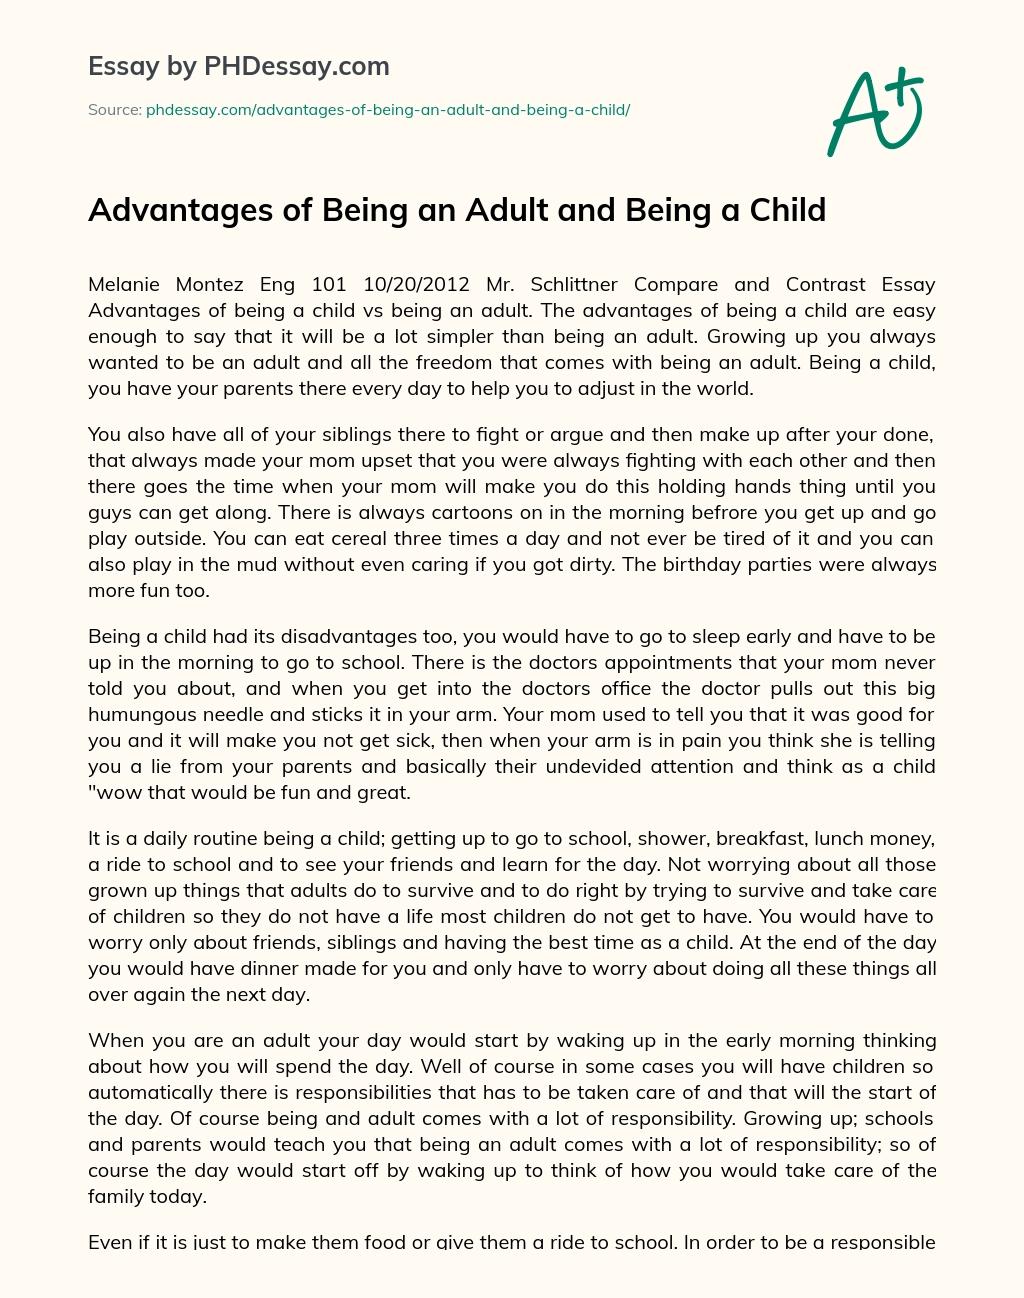 Advantages of Being an Adult and Being a Child essay